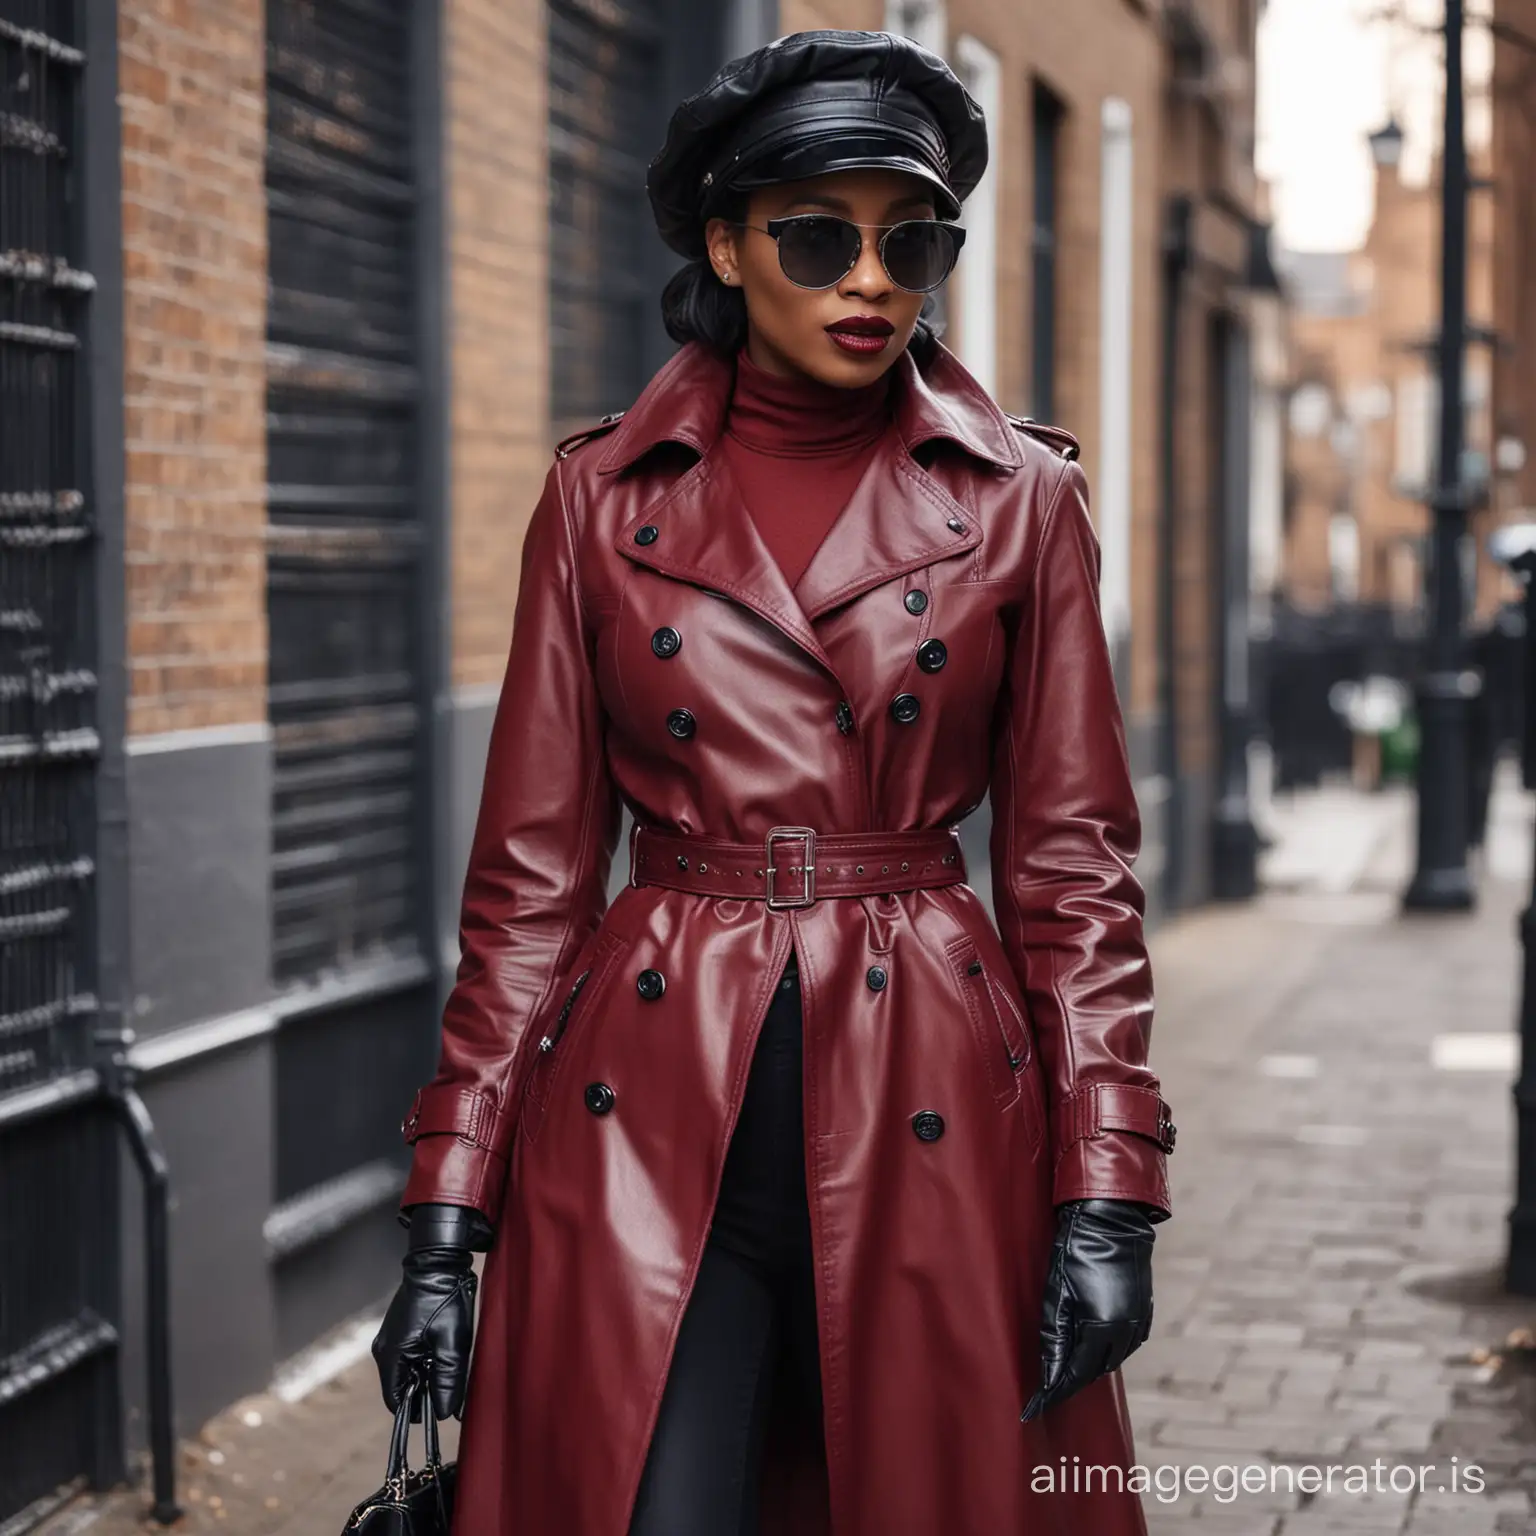 Stylish-Ebony-Woman-in-Dark-Red-Leather-Trench-Coat-and-Accessories